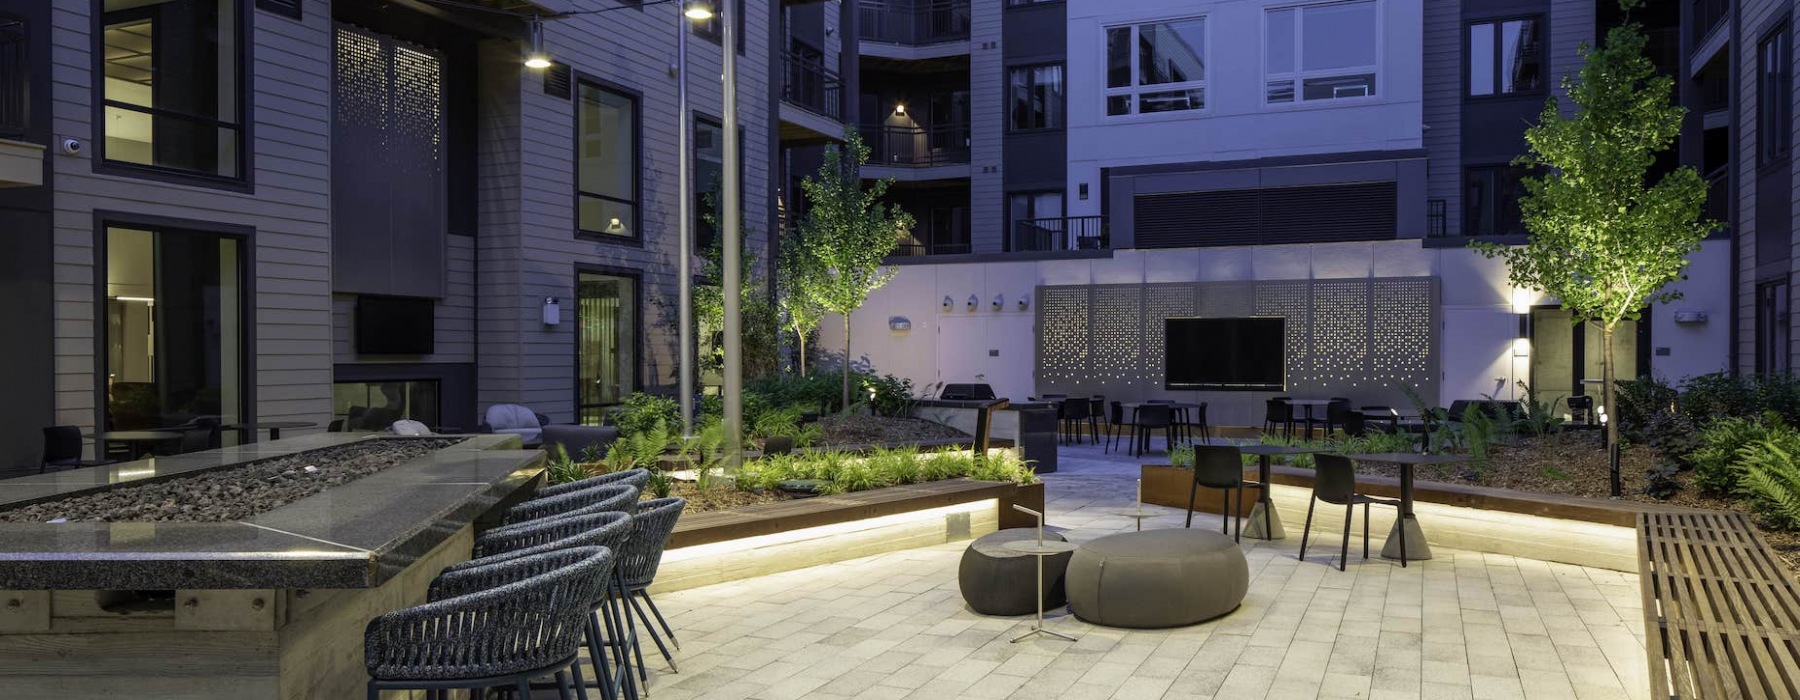 the andi apartments Dorchester courtyard with tv, fireplace, and ample seating